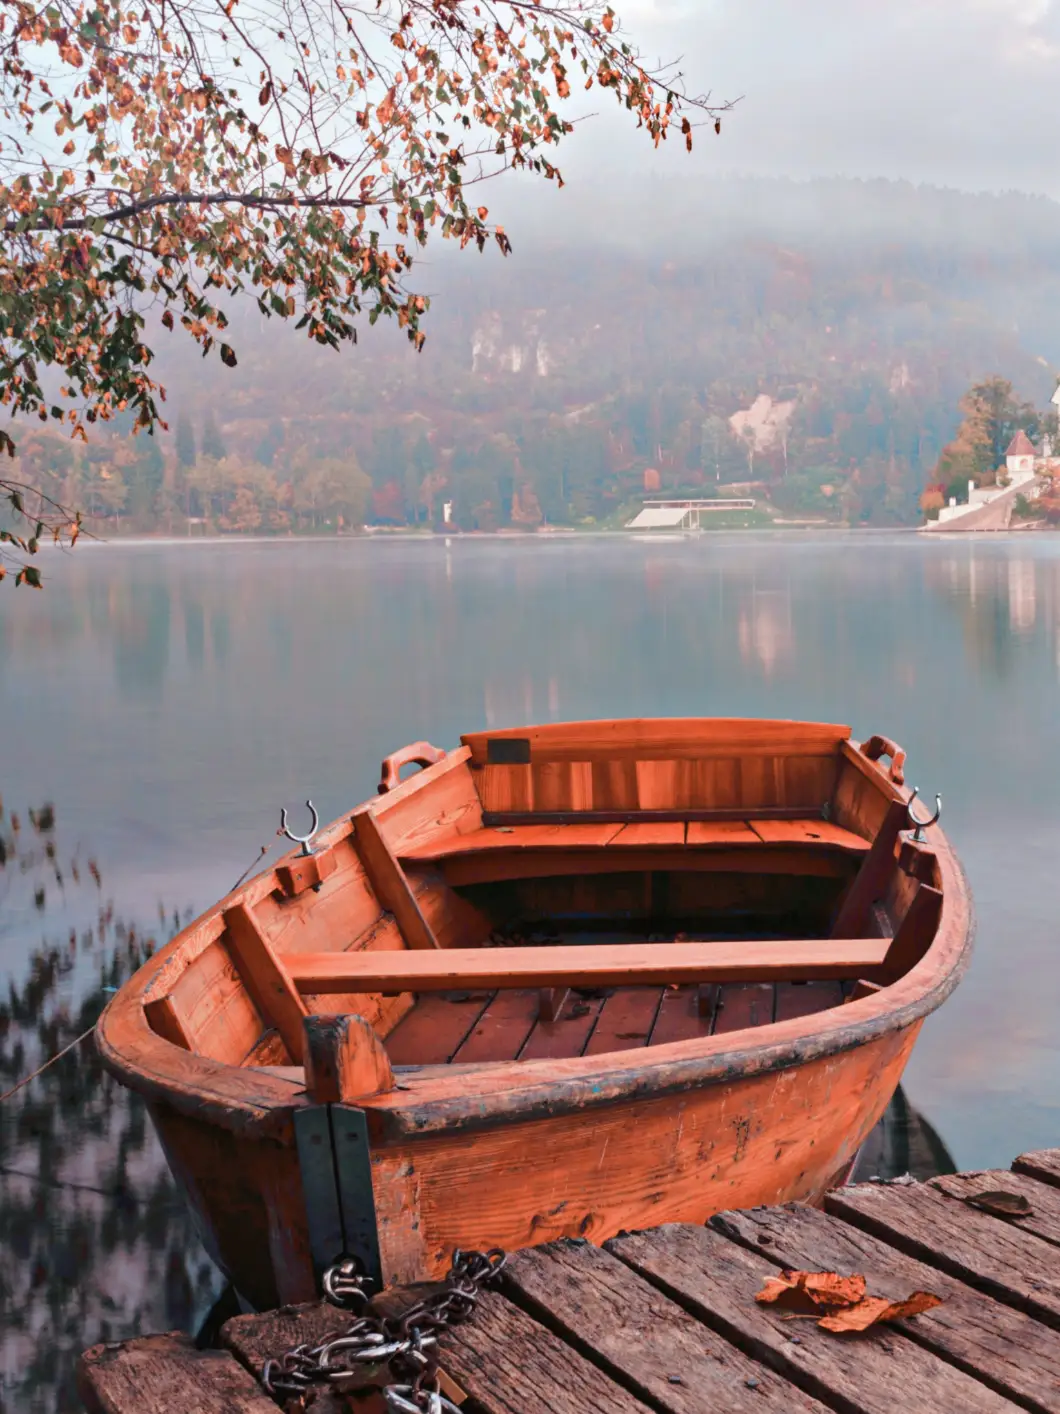 You are currently viewing Boat background for photo editing download full hd